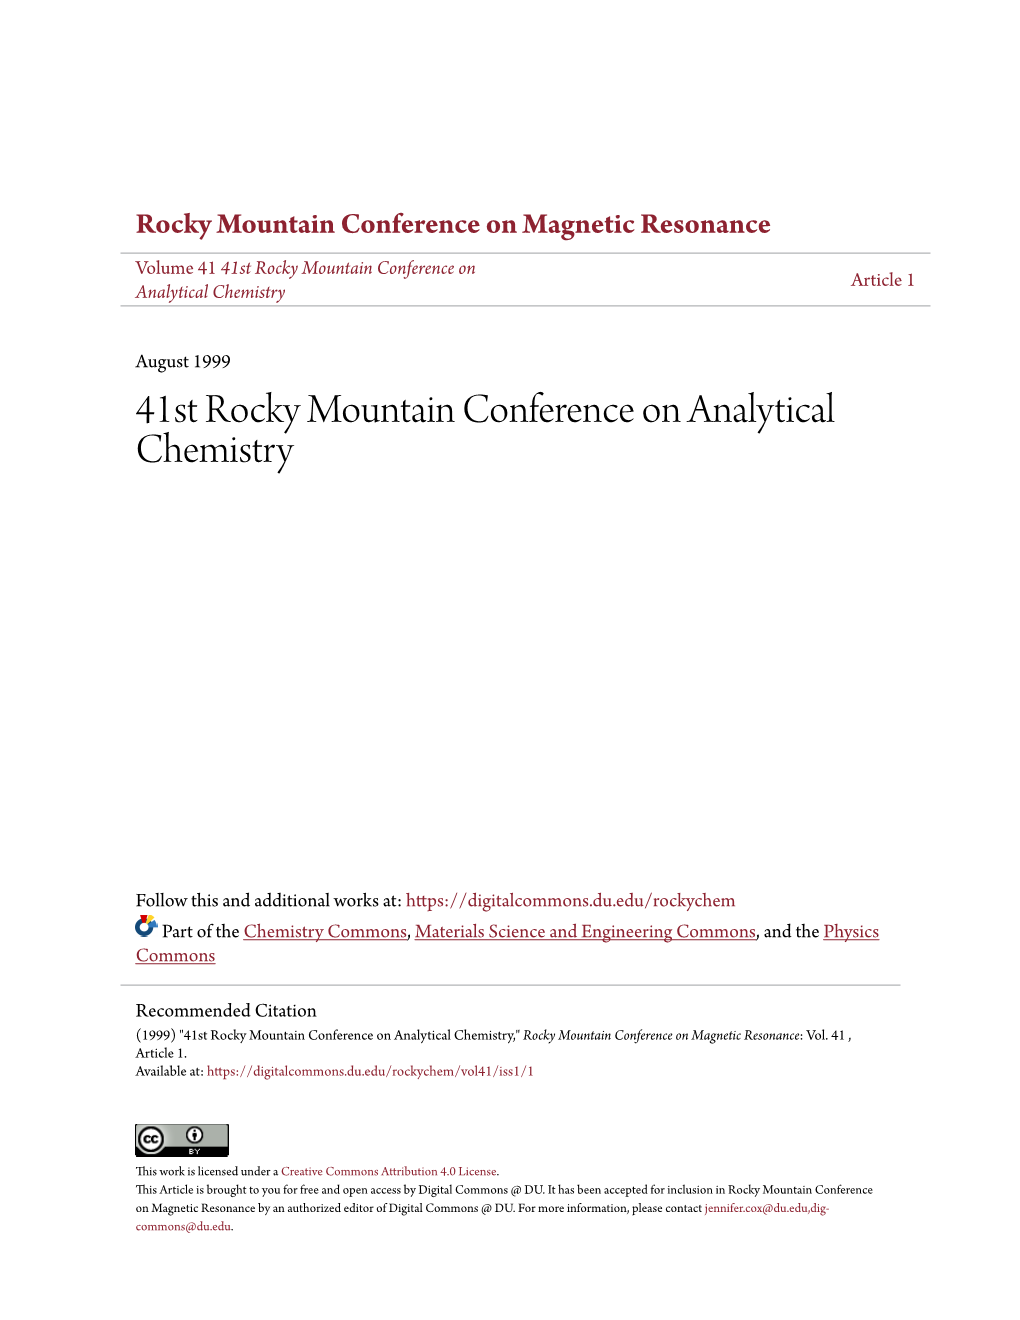 41St Rocky Mountain Conference on Analytical Chemistry